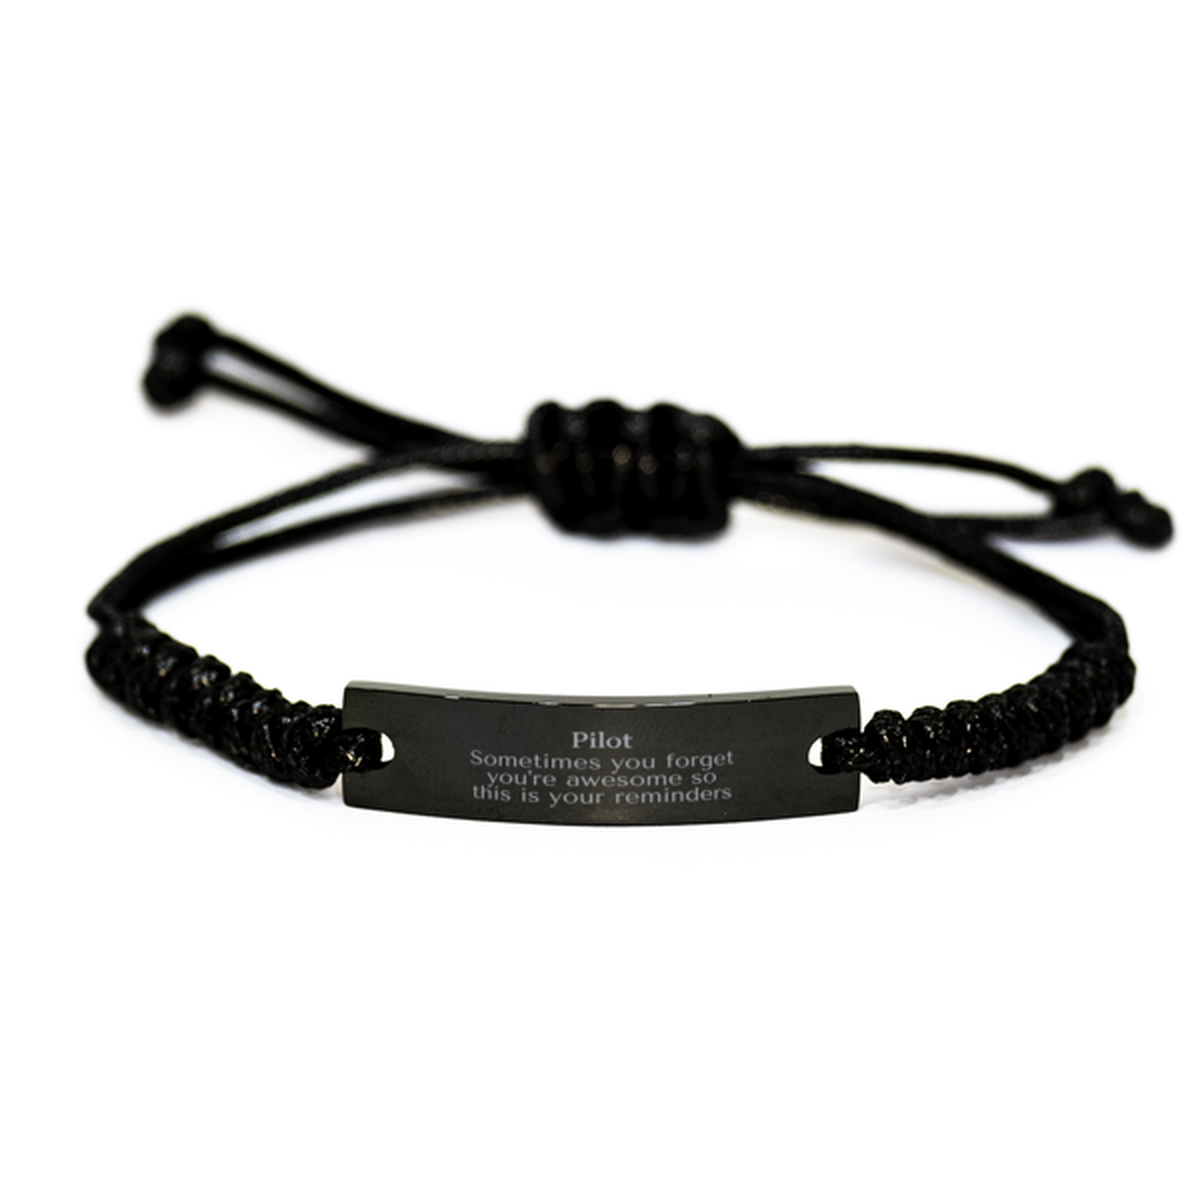 Sentimental Pilot Black Rope Bracelet, Pilot Sometimes you forget you're awesome so this is your reminders, Graduation Christmas Birthday Gifts for Pilot, Men, Women, Coworkers